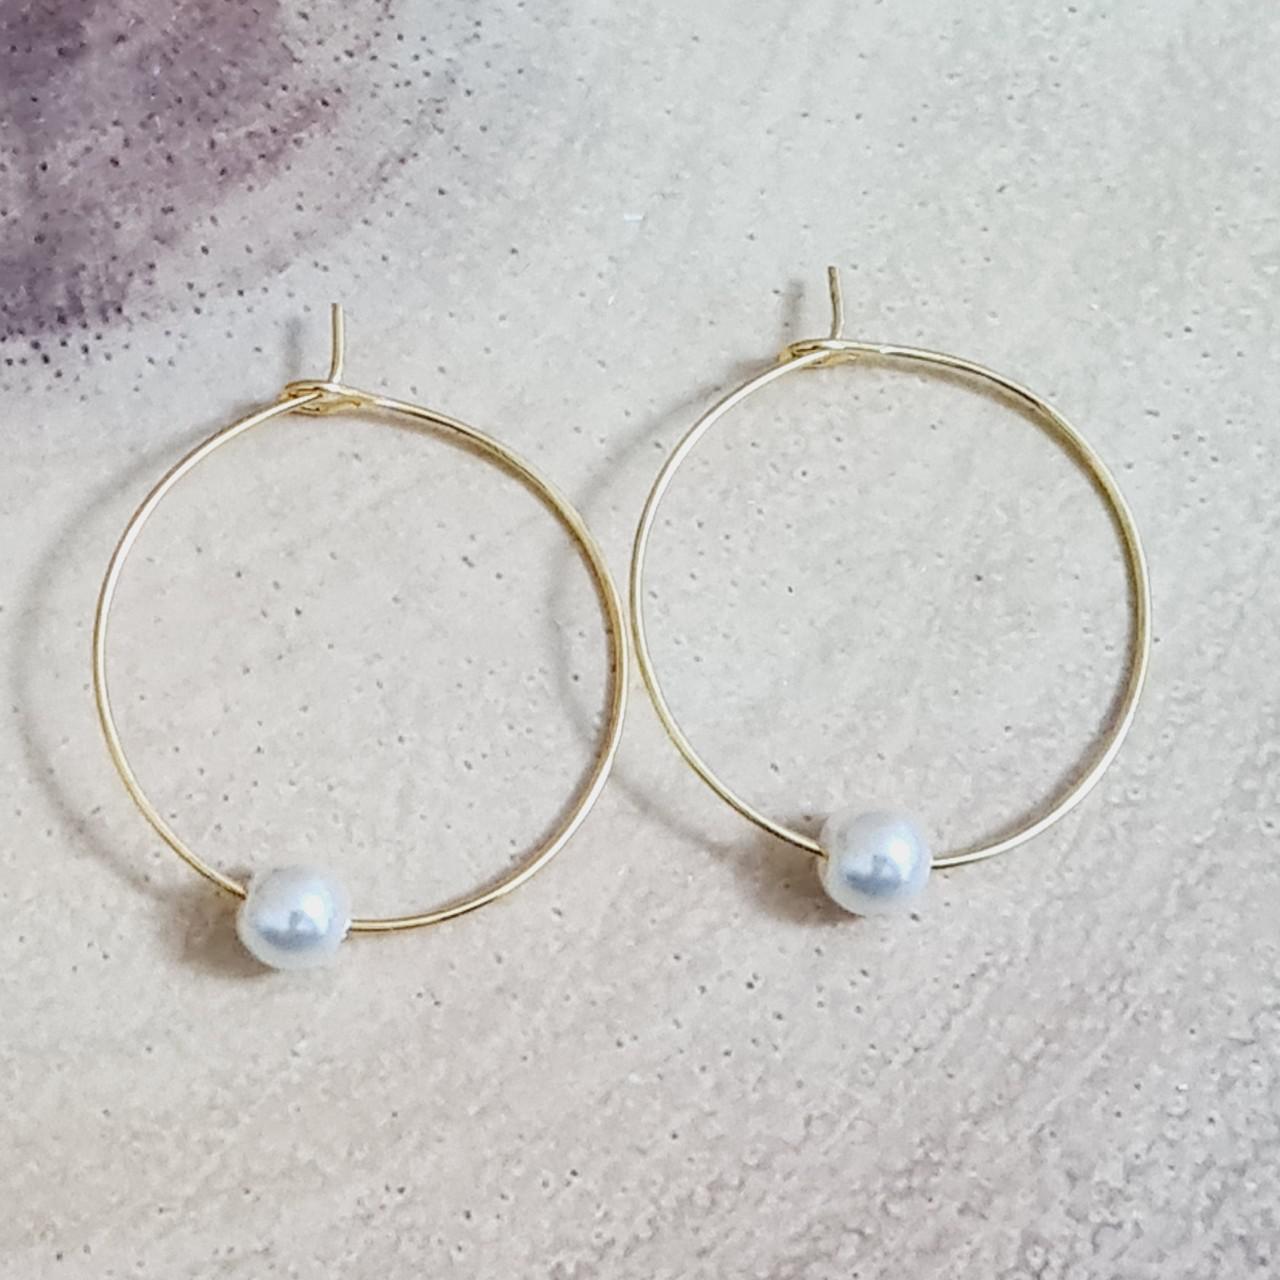 Unbranded Women's White and Gold Jewellery